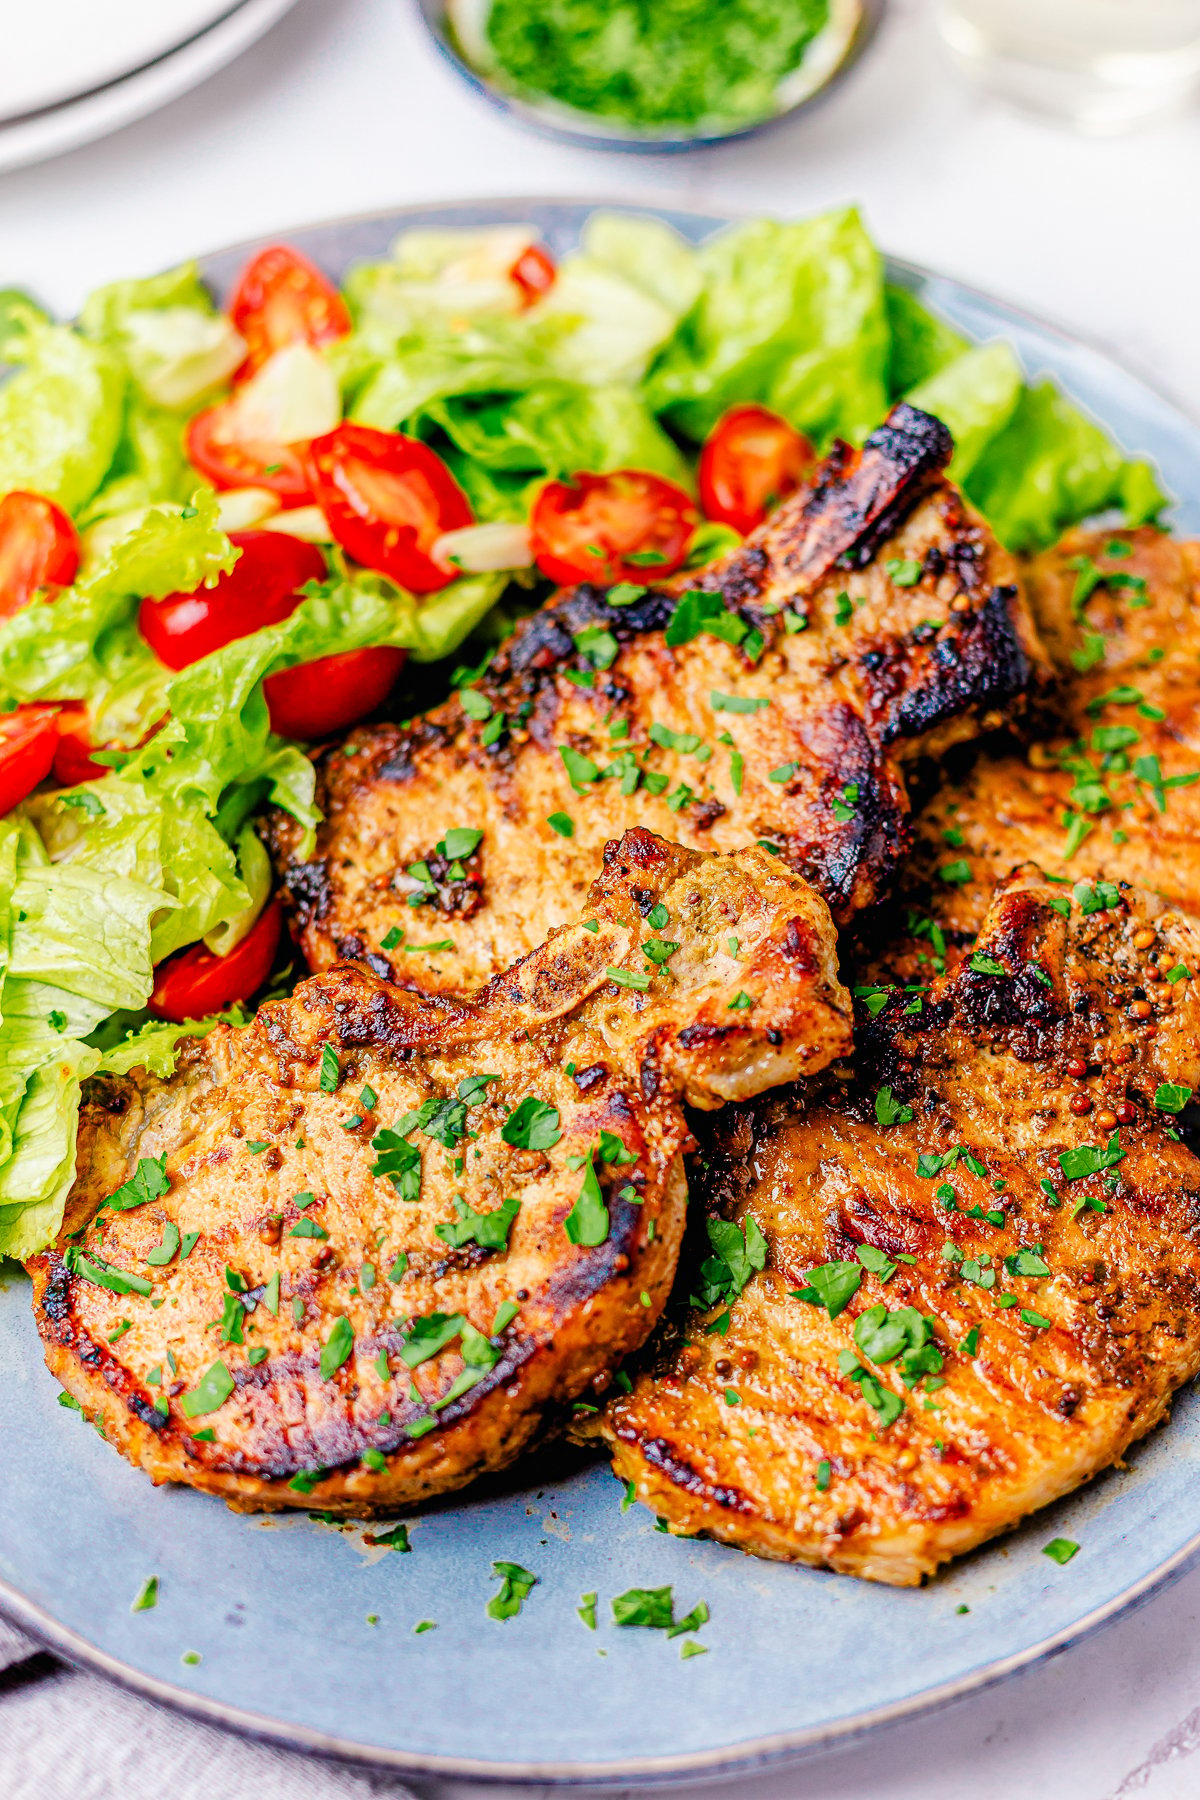 Two Grilled Pork Chops on plate with salad 